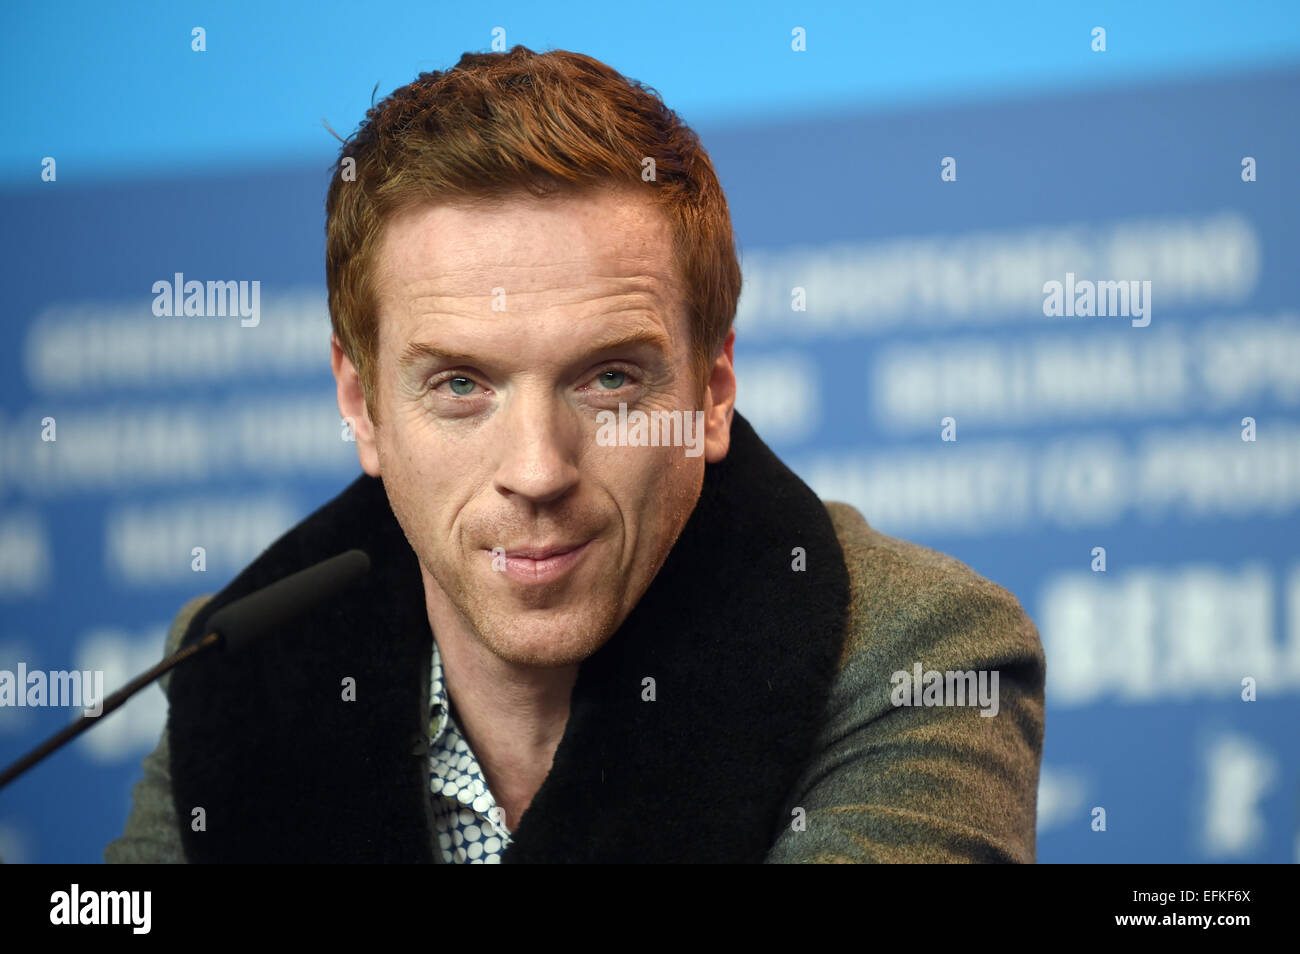 Berlin, Germany. 06th Feb, 2015. British actor Damian Lewis attends the press conference for 'Queen of the Desert' at the 65th annual Berlin Film Festival, in Berlin, Germany, 06 February 2015. The movie is presented in the Official Competition of the Berlinale, which runs from 05 to 15 February 2015. PHOTO: TIM BRAKEMEIER/dpa/Alamy Live News Stock Photo